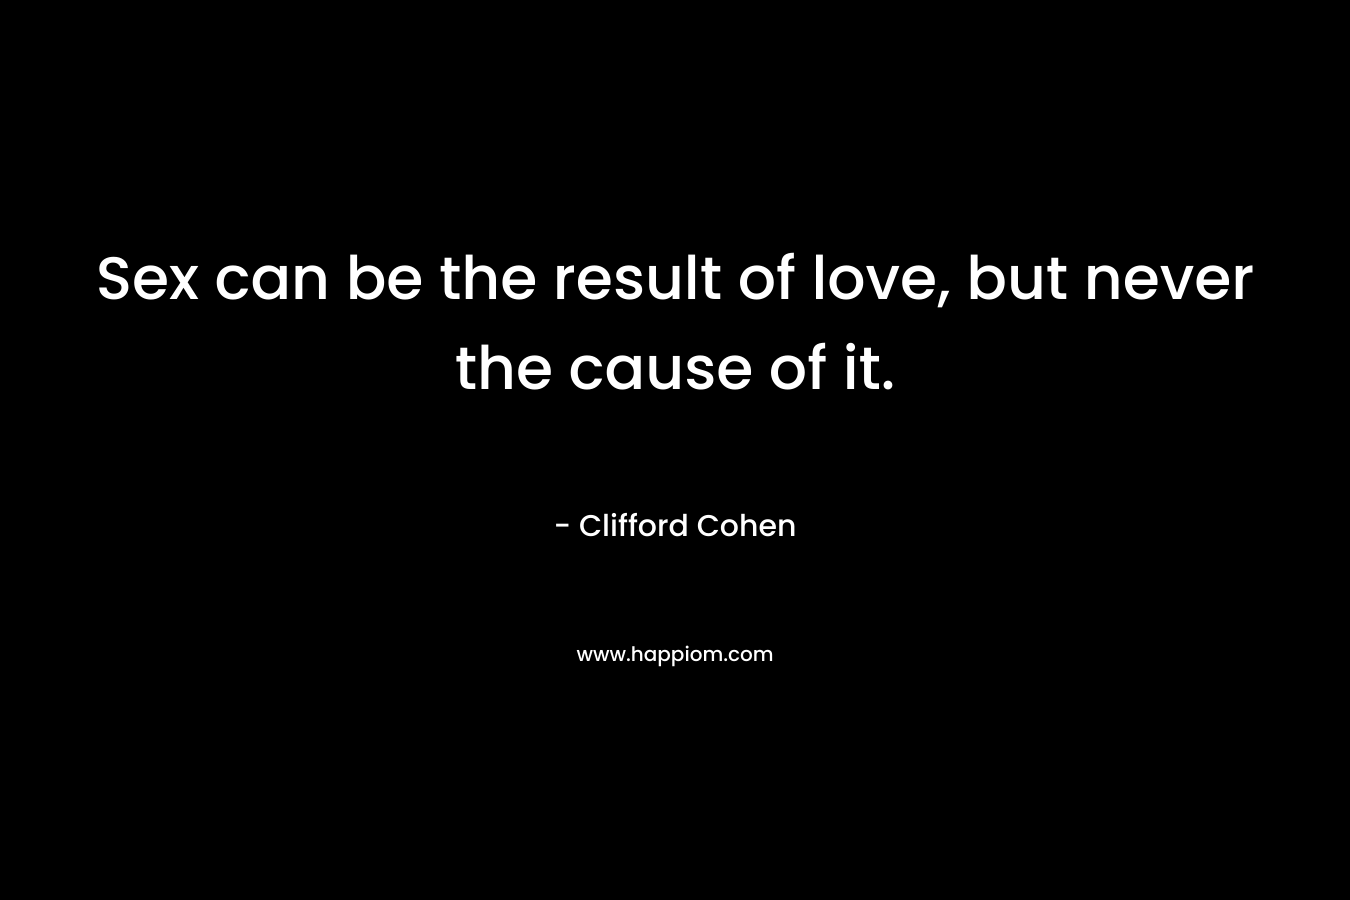 Sex can be the result of love, but never the cause of it. – Clifford Cohen